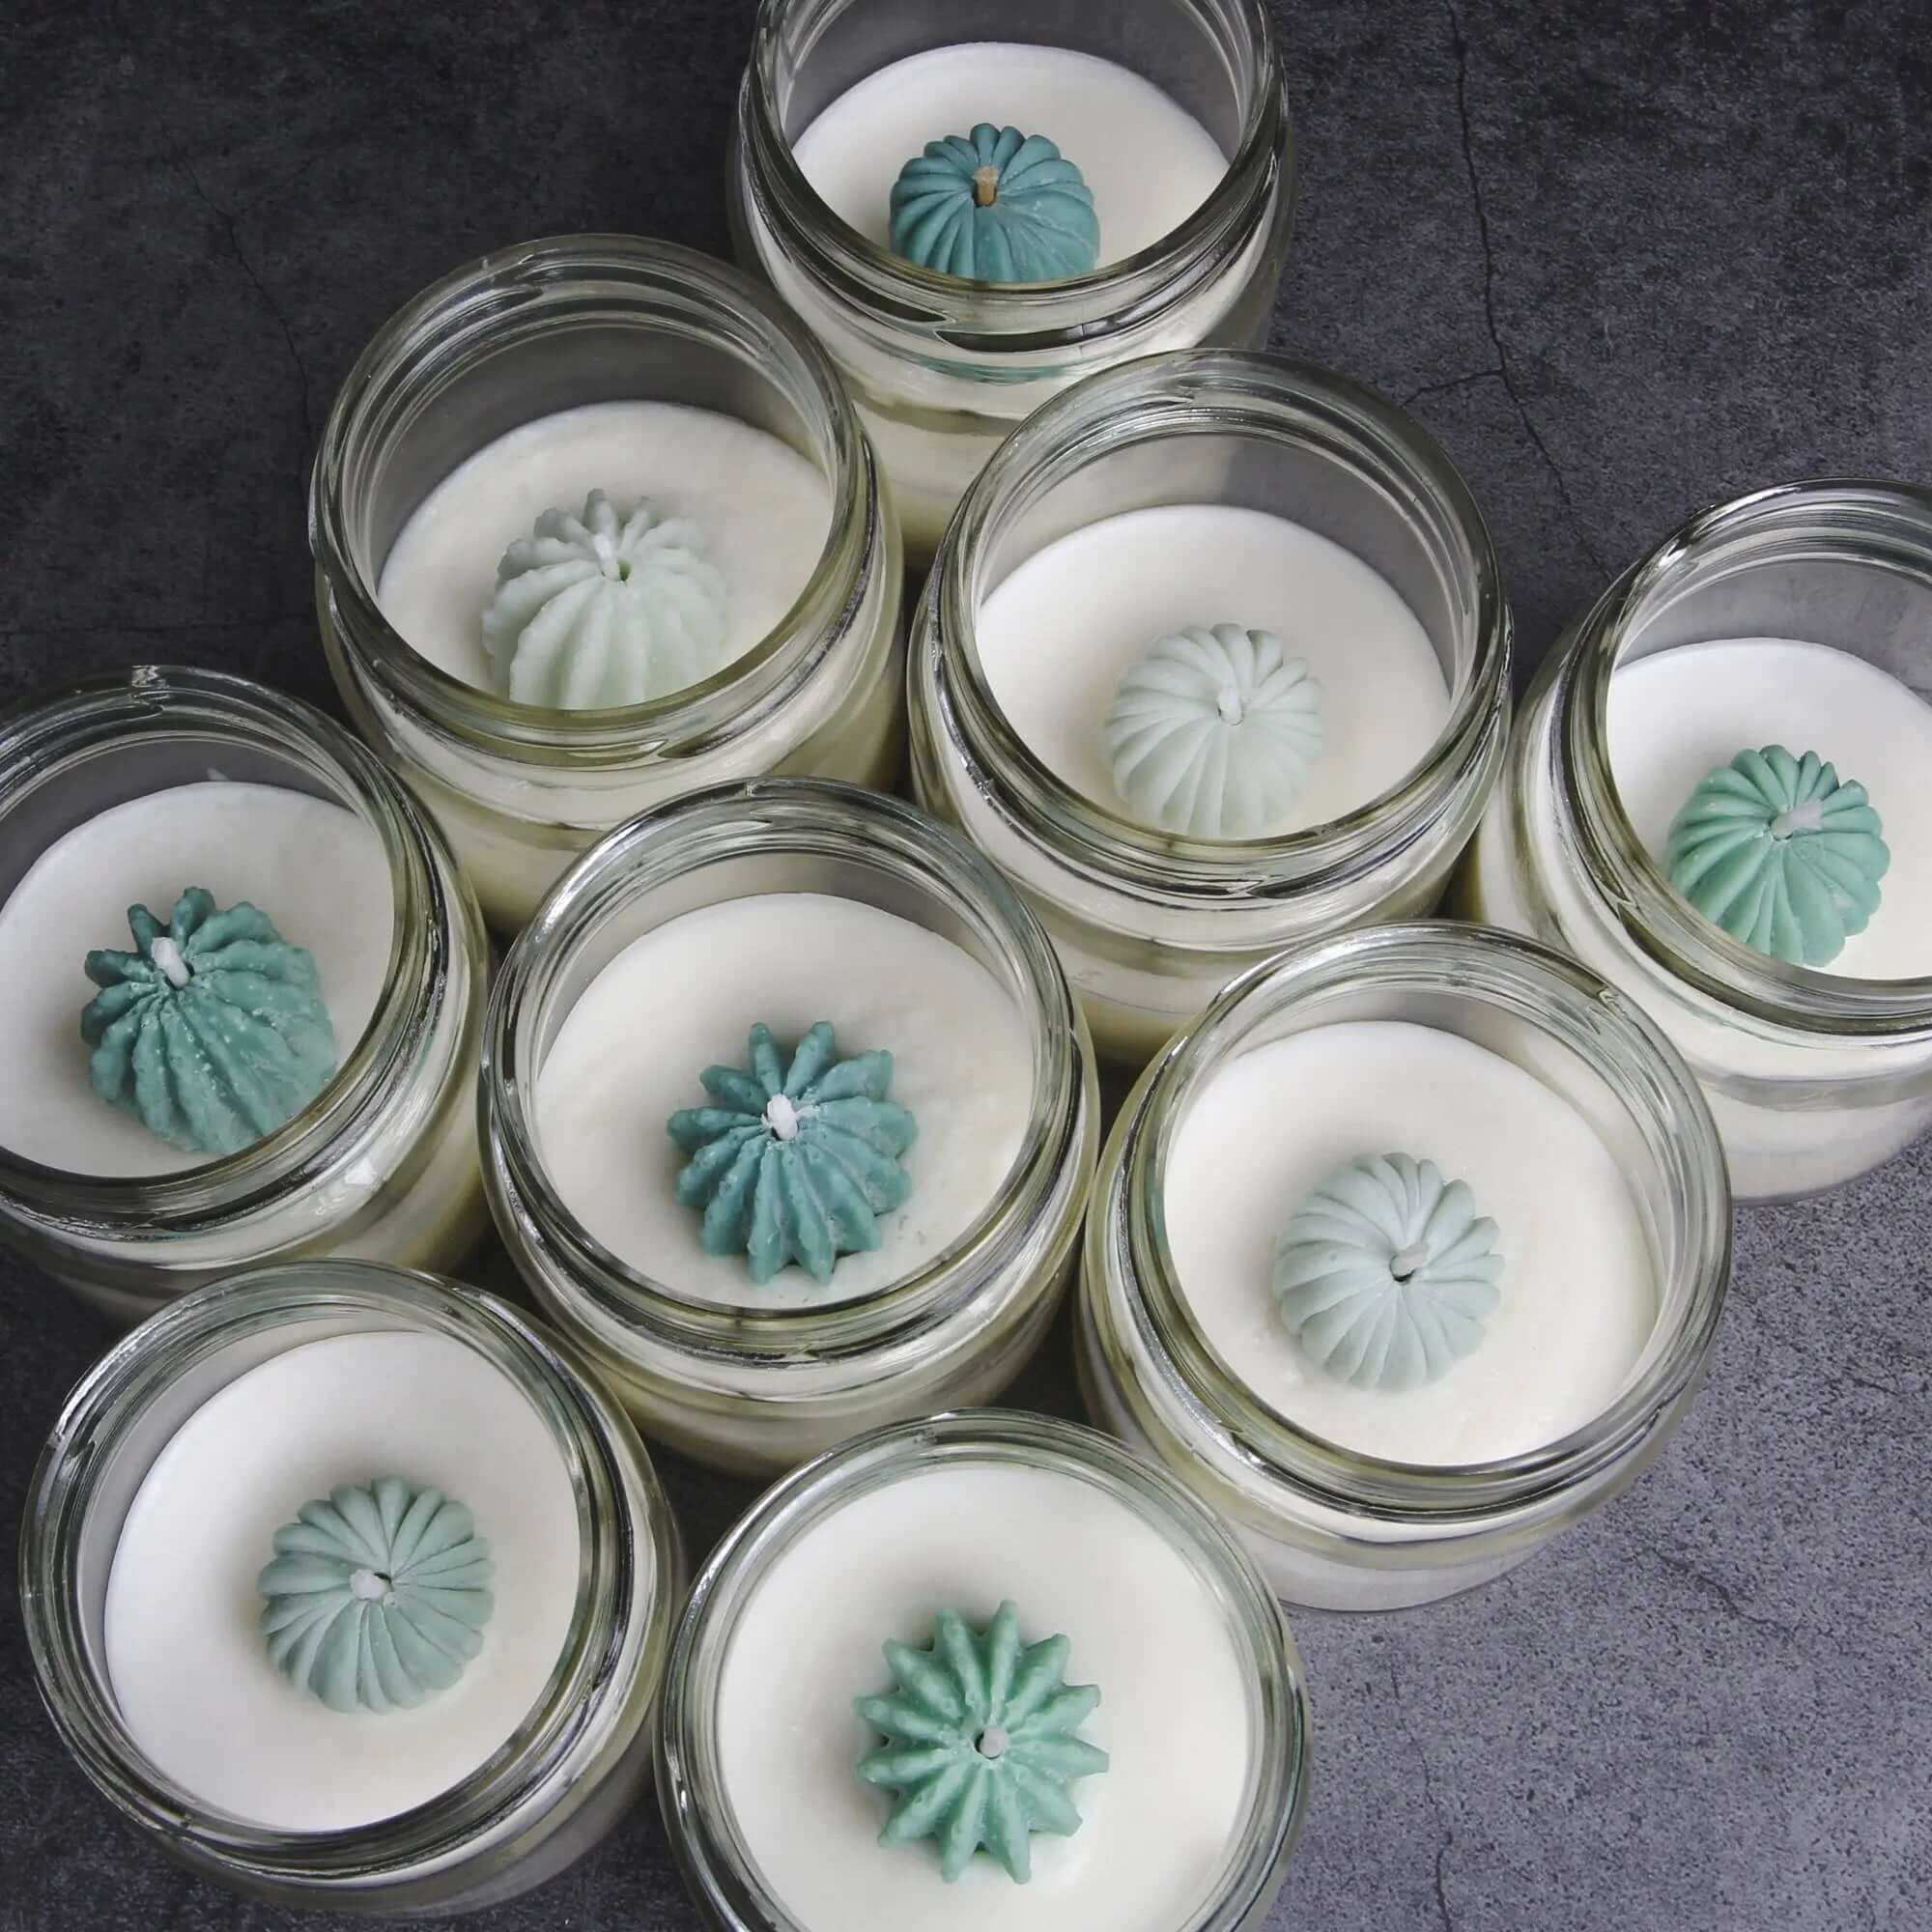 Mini Cactus Candle "Little Prick", Unscented - Handmade - Soy Wax - SMUKHI